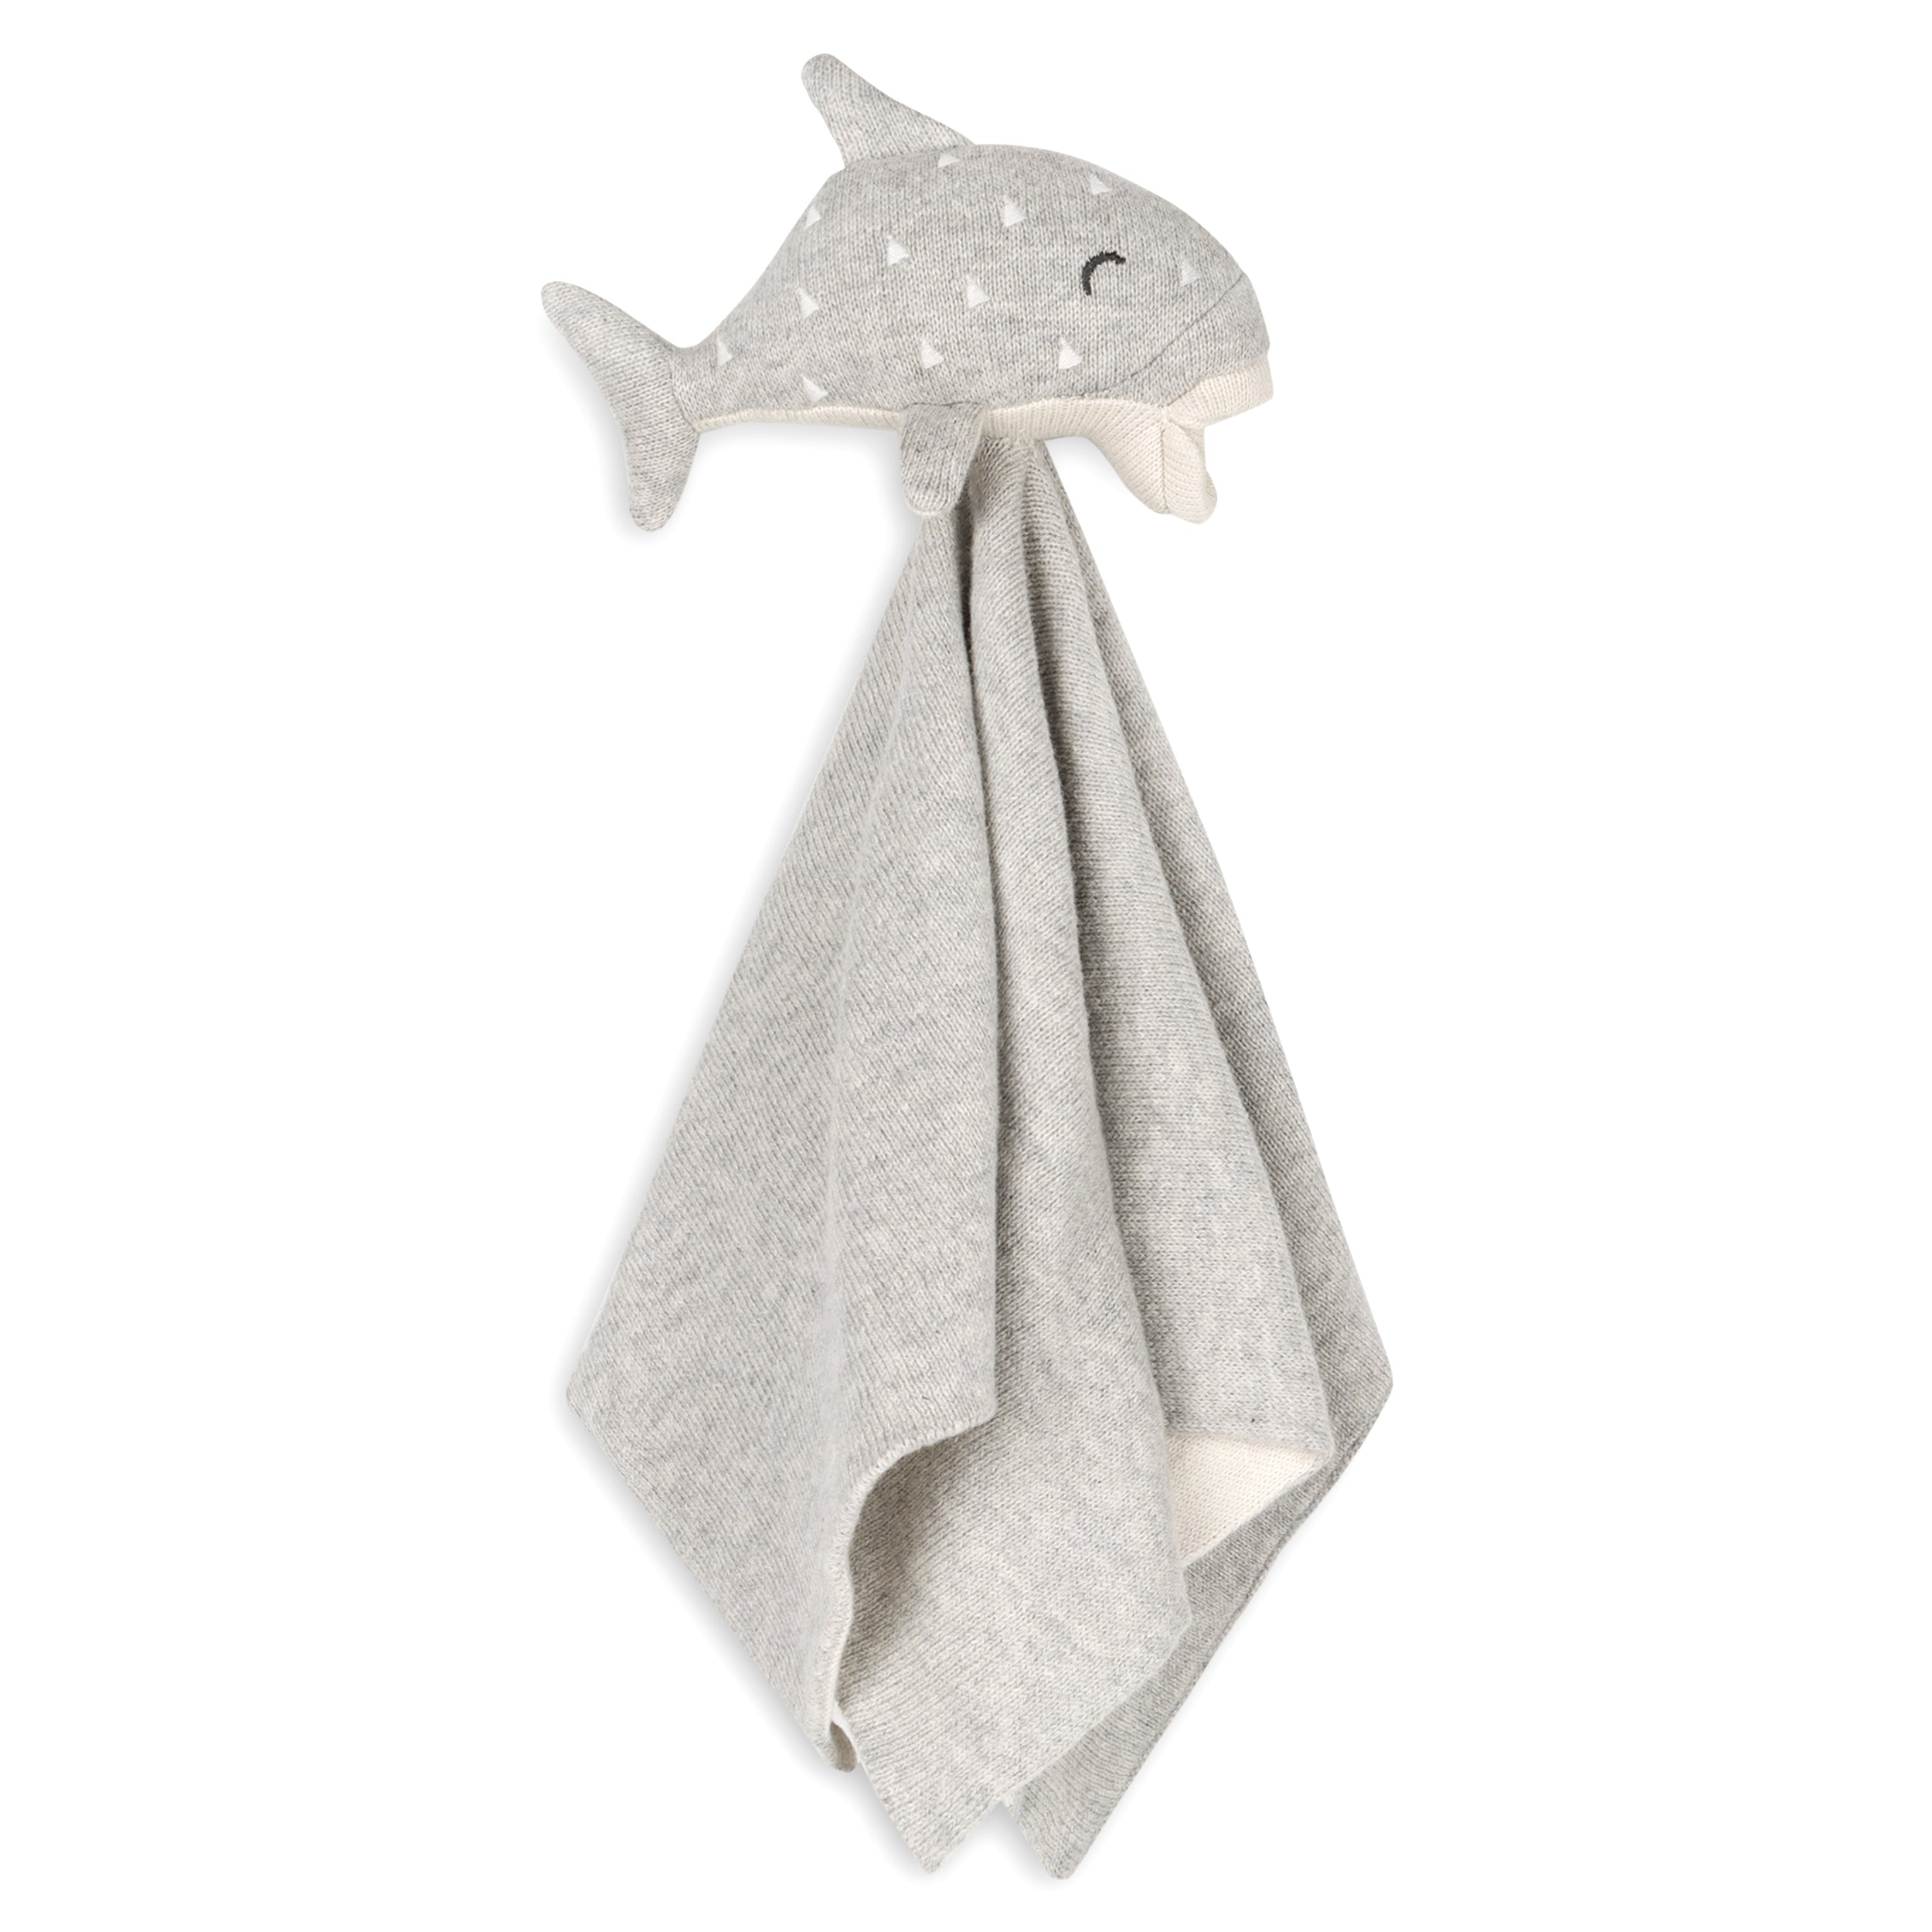 Whale - Organic Baby Lovey Security Blanket